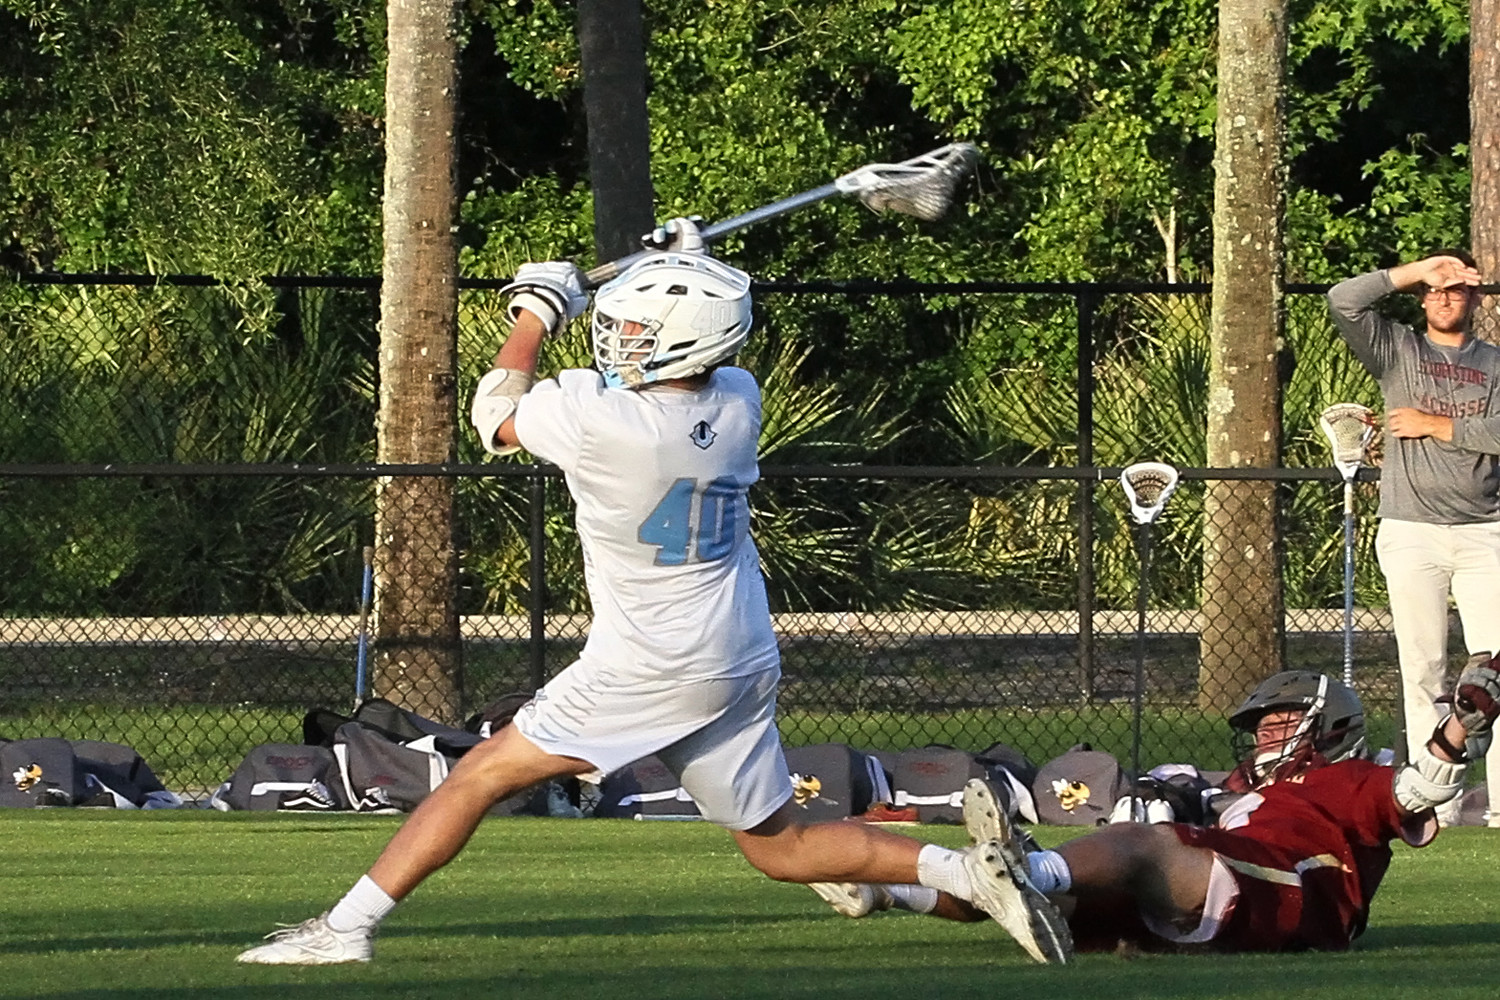 Ponte Vedra’s Dylan Hess knocks over a defender and attempts a shot in the Sharks’ 12-6 win over St. Augustine on Tuesday, May 1.